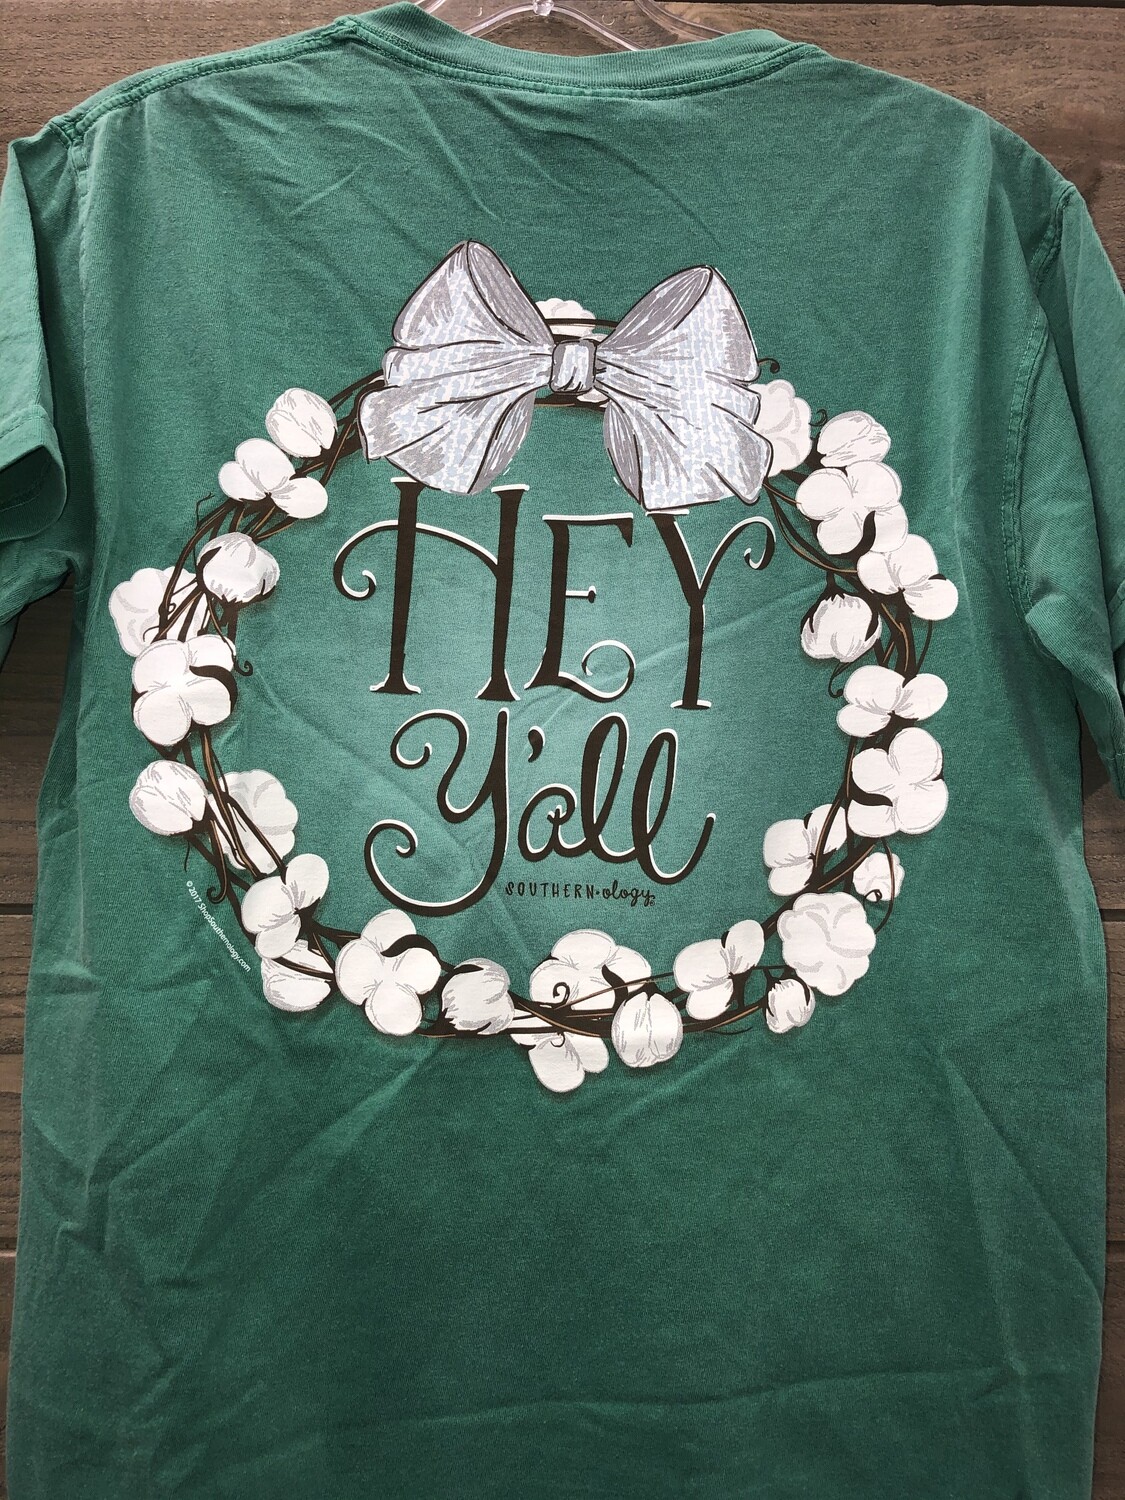 Southernology - Hey Y'all Cotton Wreath